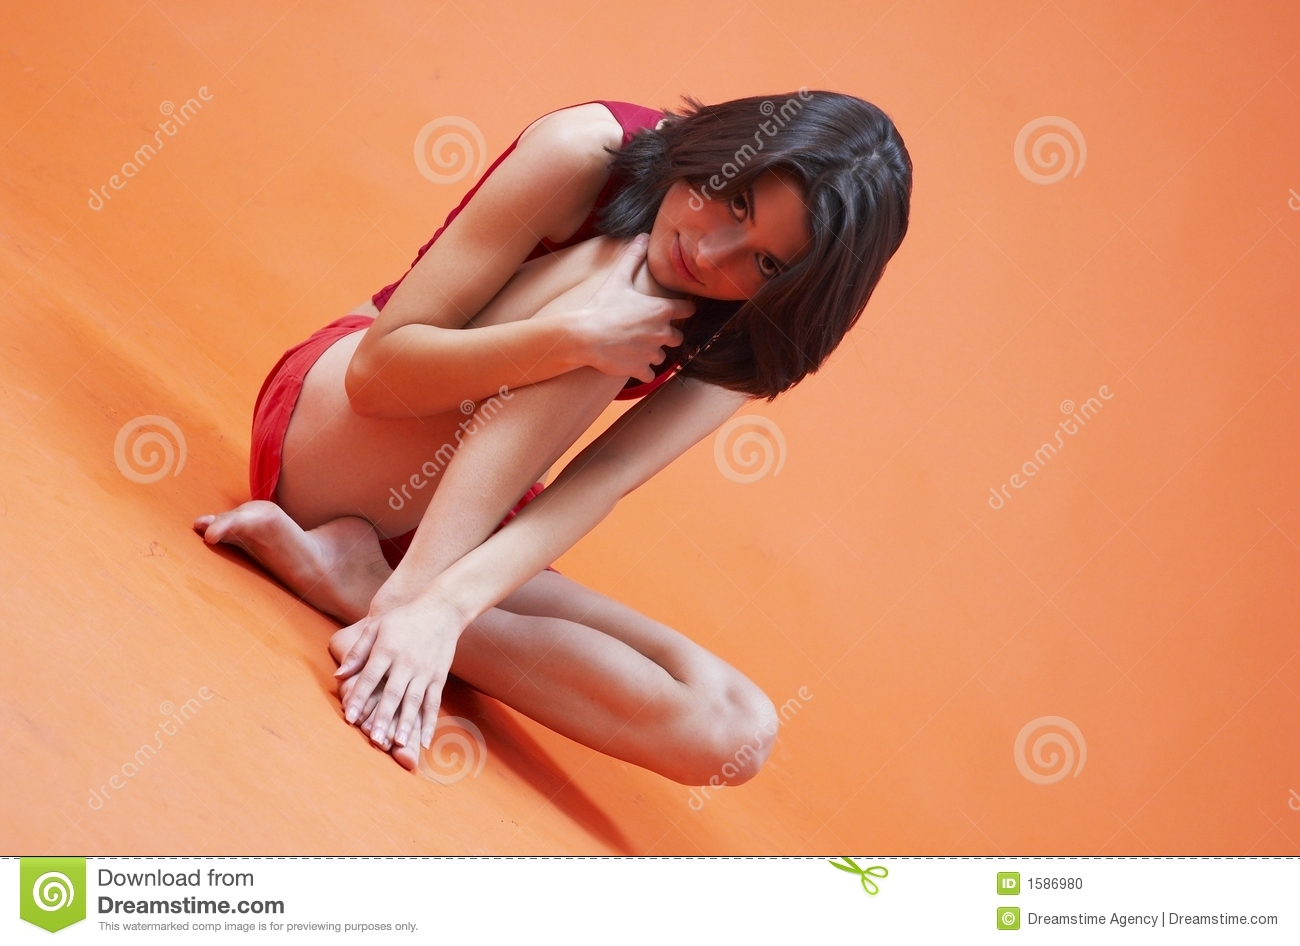 Teenage Girl Sitting On The Floor In A Shy Pose  One Knee Pulled Up    